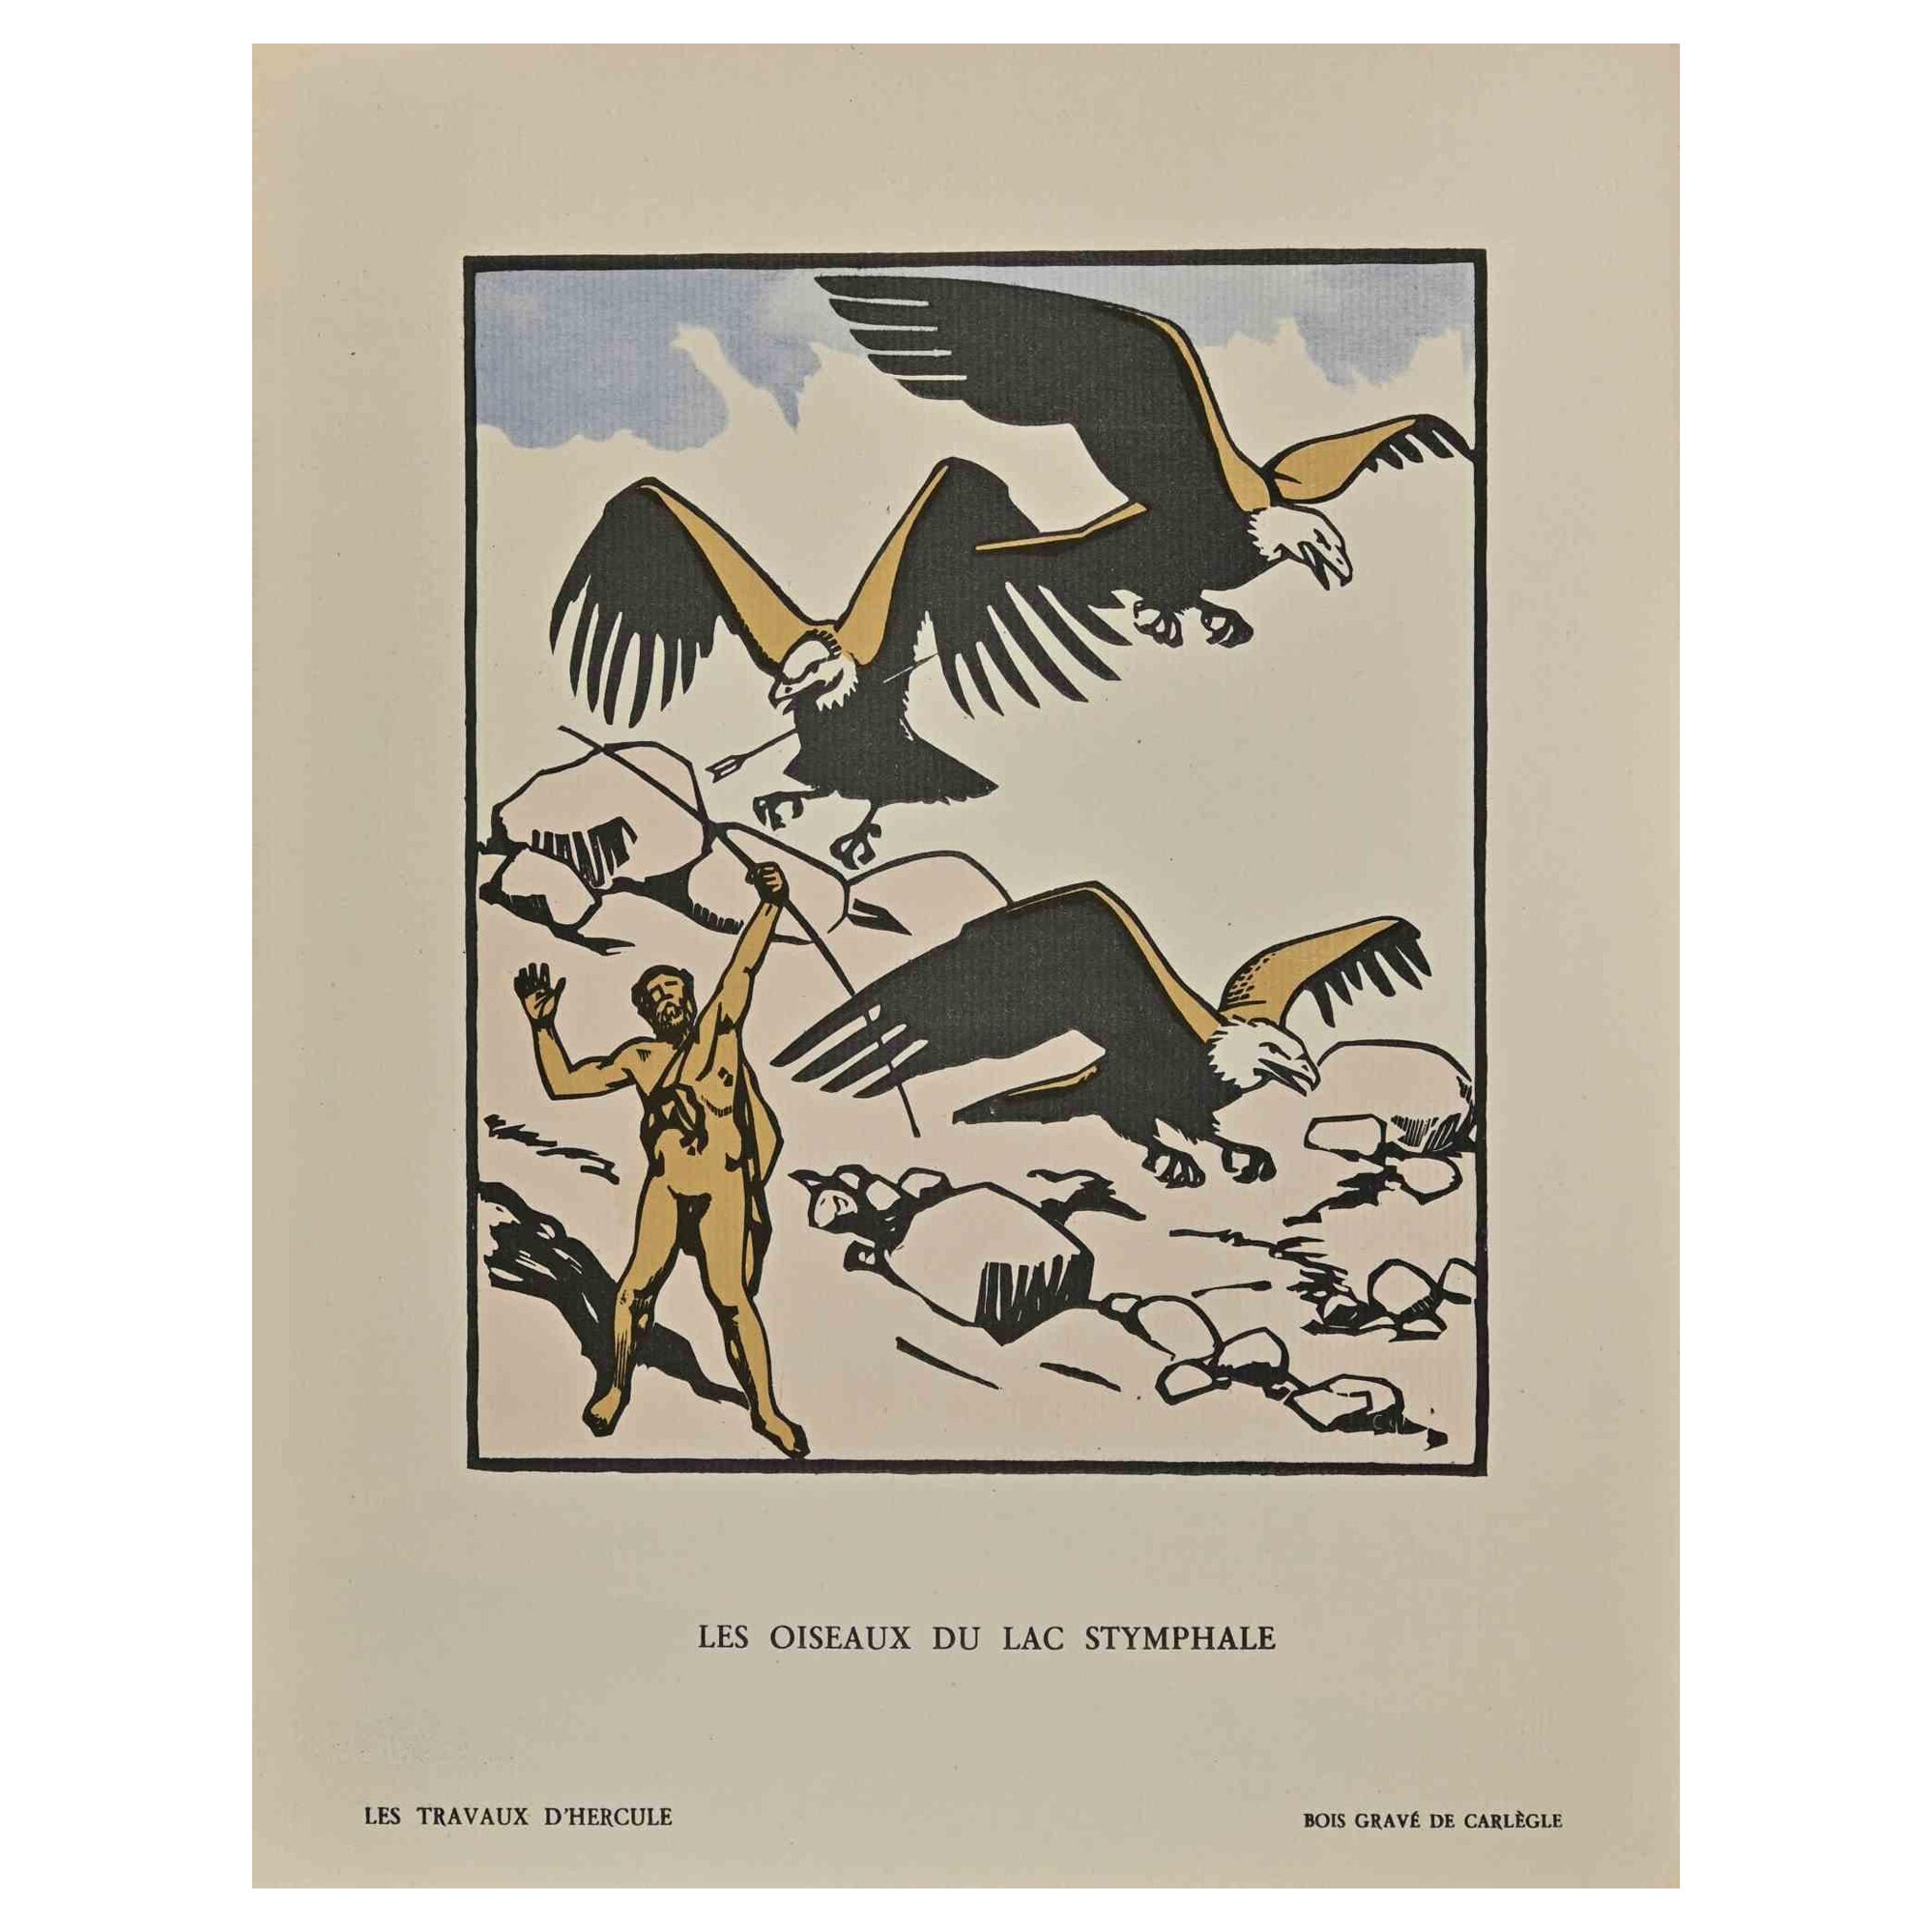 Les Oiseaux Du Lac Stymphale is a Woodcut Print realized by Carlège (Charles Emile Egli, 30 March 1877 – 11 January 1937).

Belongs to the suite "Les Travaux D'Hercule".

Good condition on a yellowed cardboard.

Titled, Stamp Signed on the lower